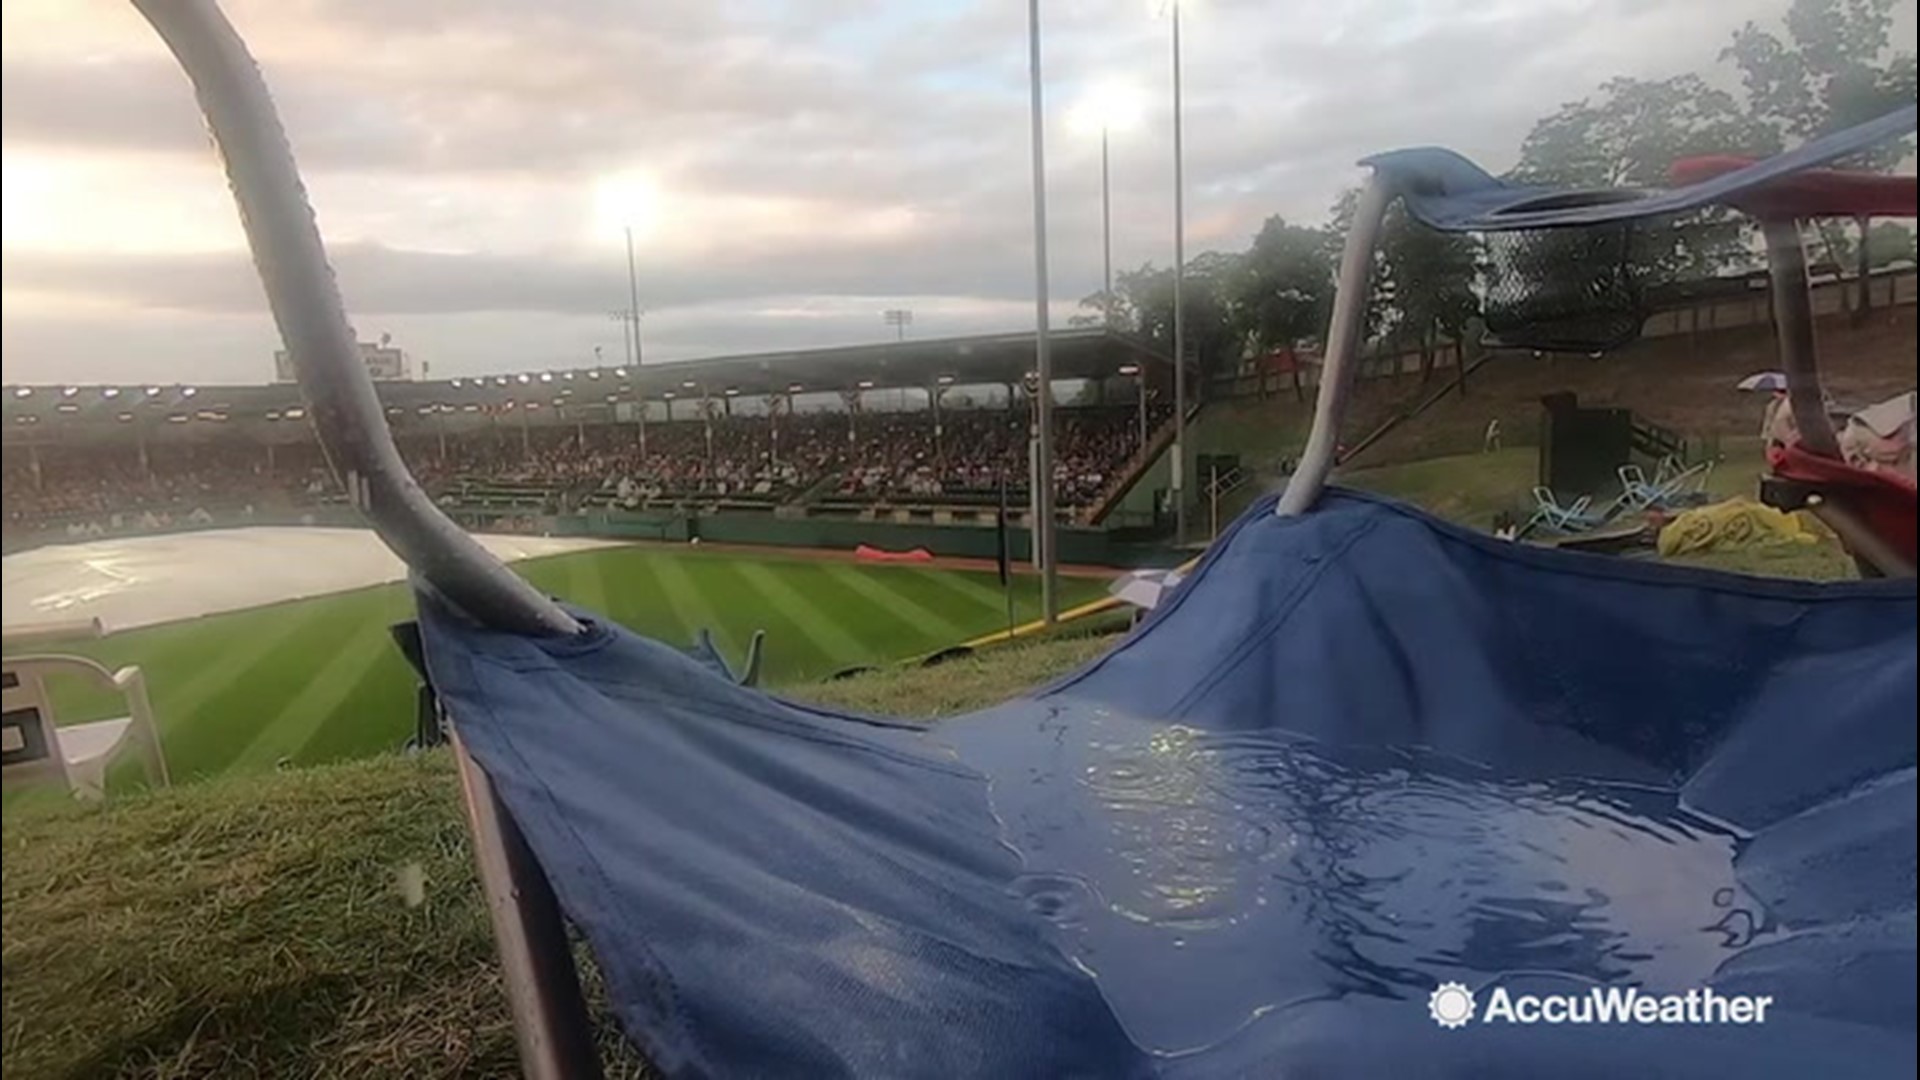 The home of the Little League Wolrd Series, South Williamsport, Pennsylvania, was drenched by a downpour that put a stop to the games on Aug. 22.